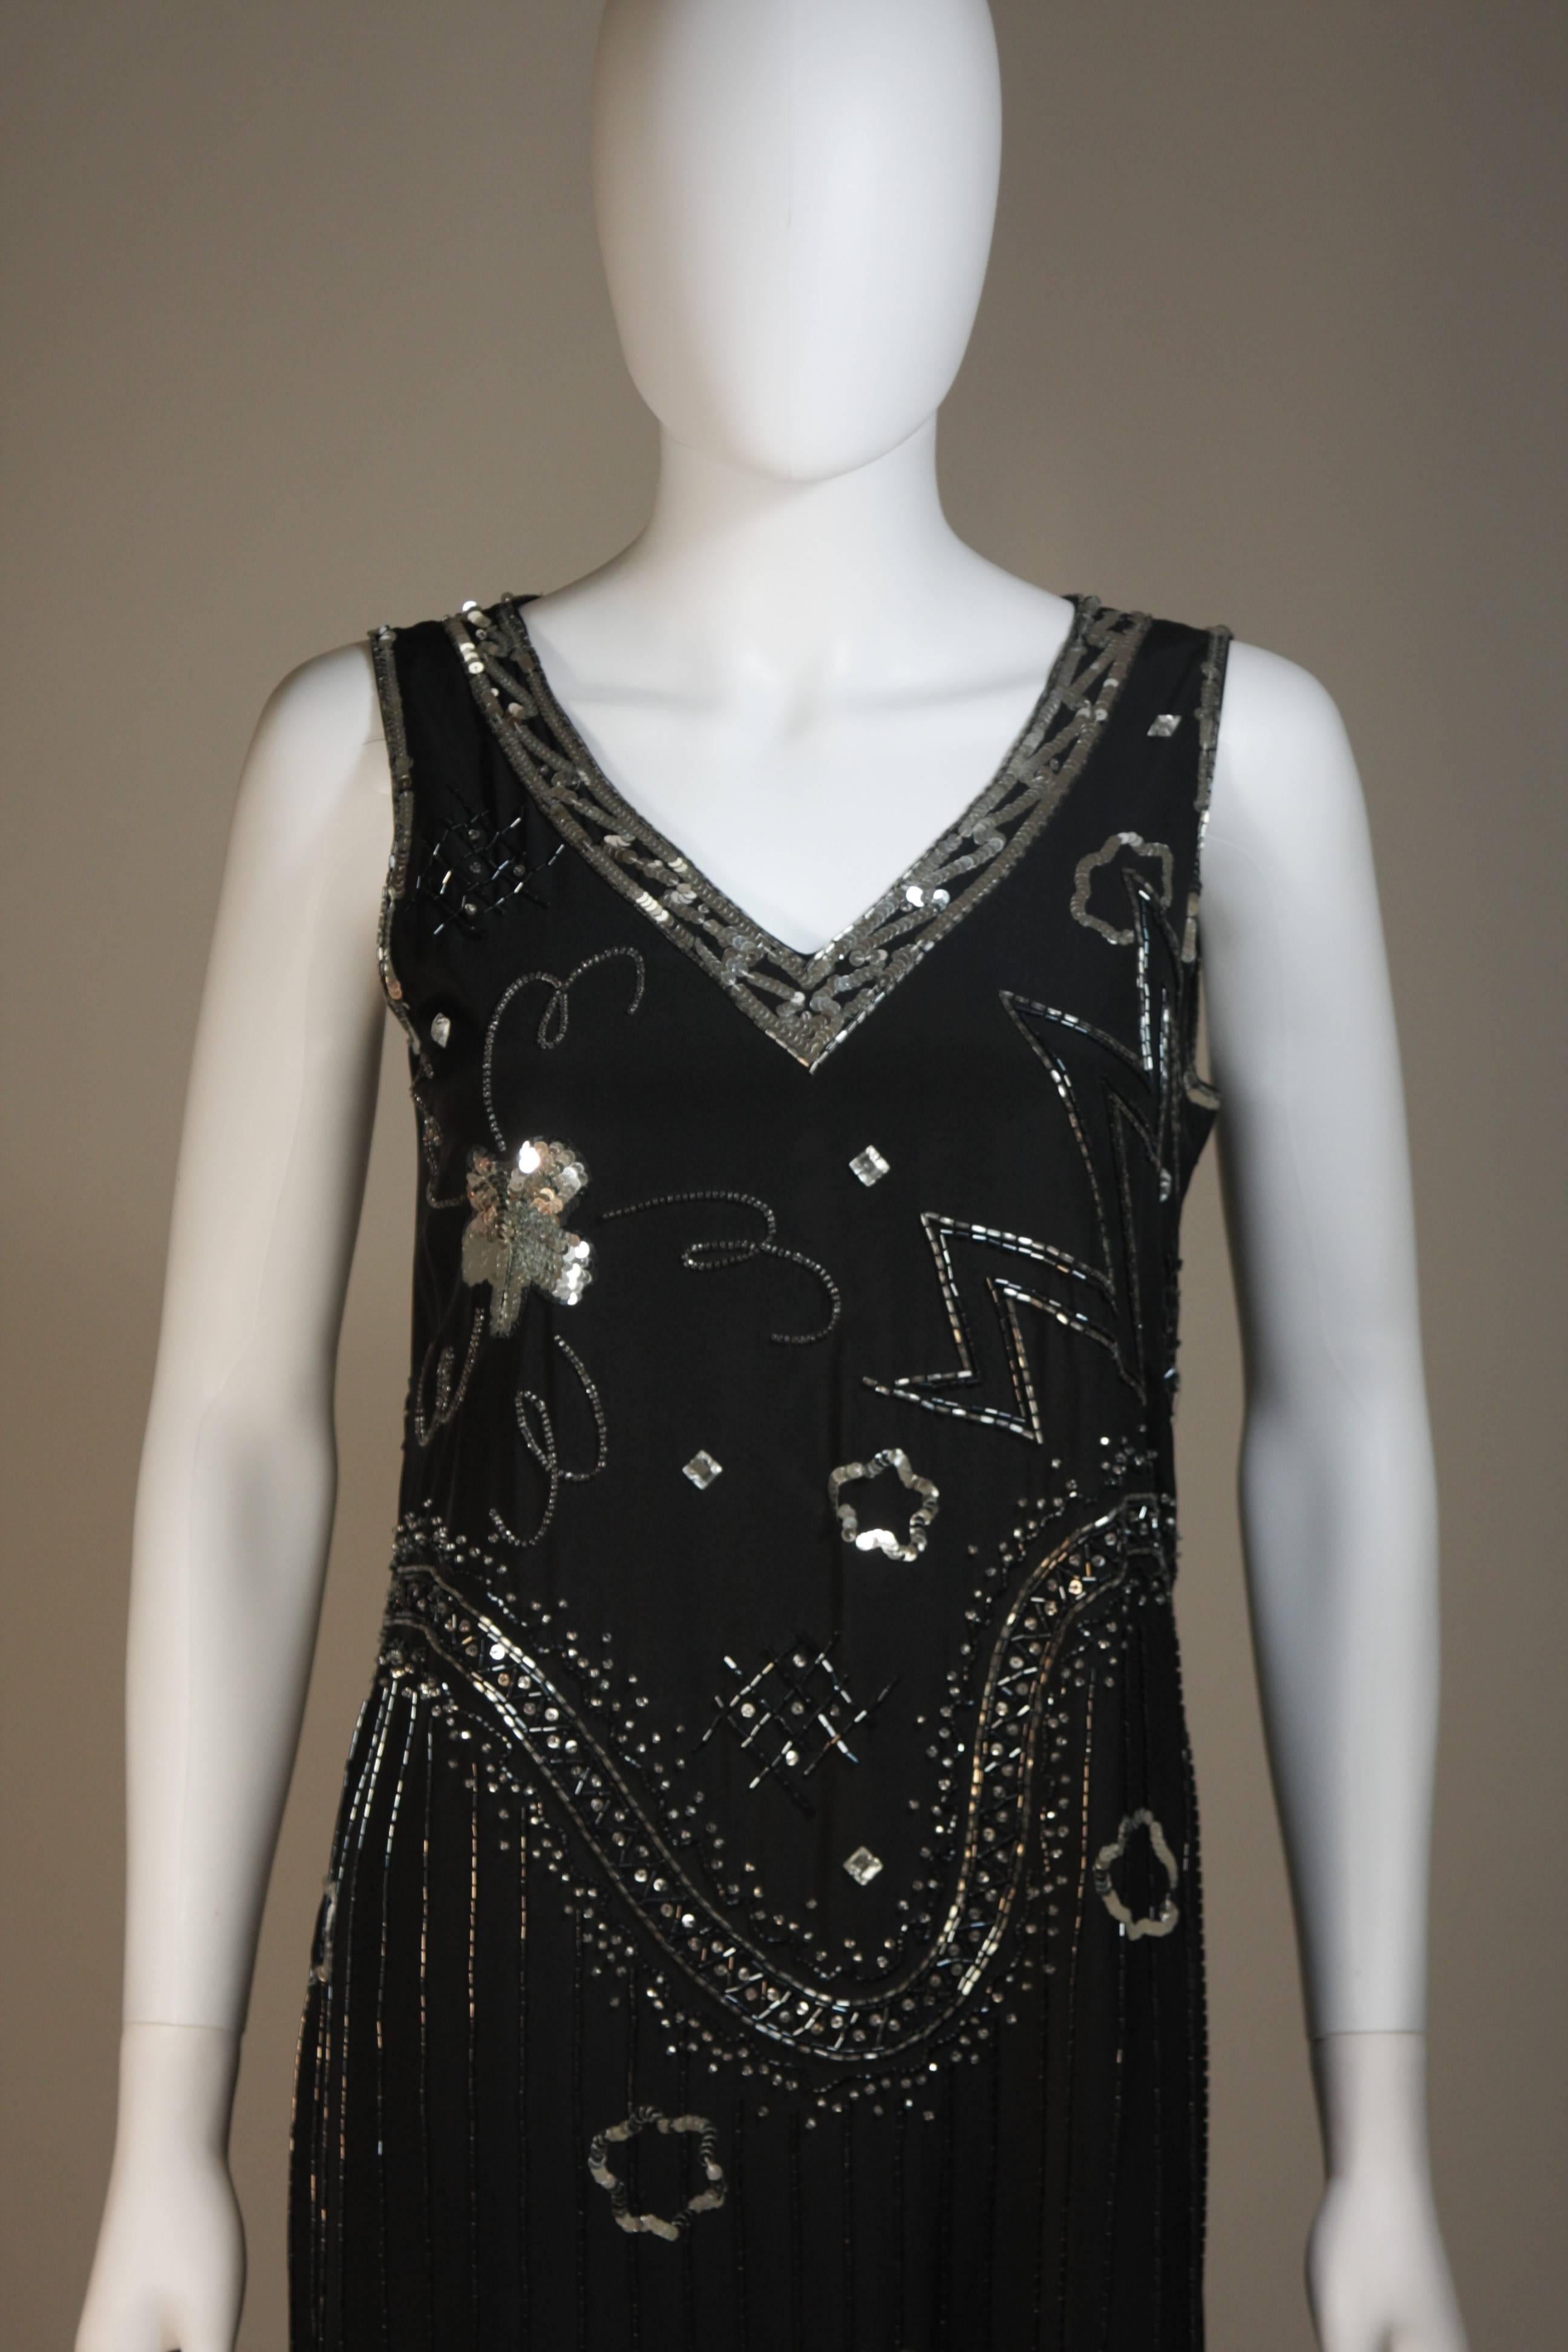 Black GIORGIO BEVERLY HILLS Sequin Embellished Deco Inspired Cocktail Dress Size 4-6 For Sale